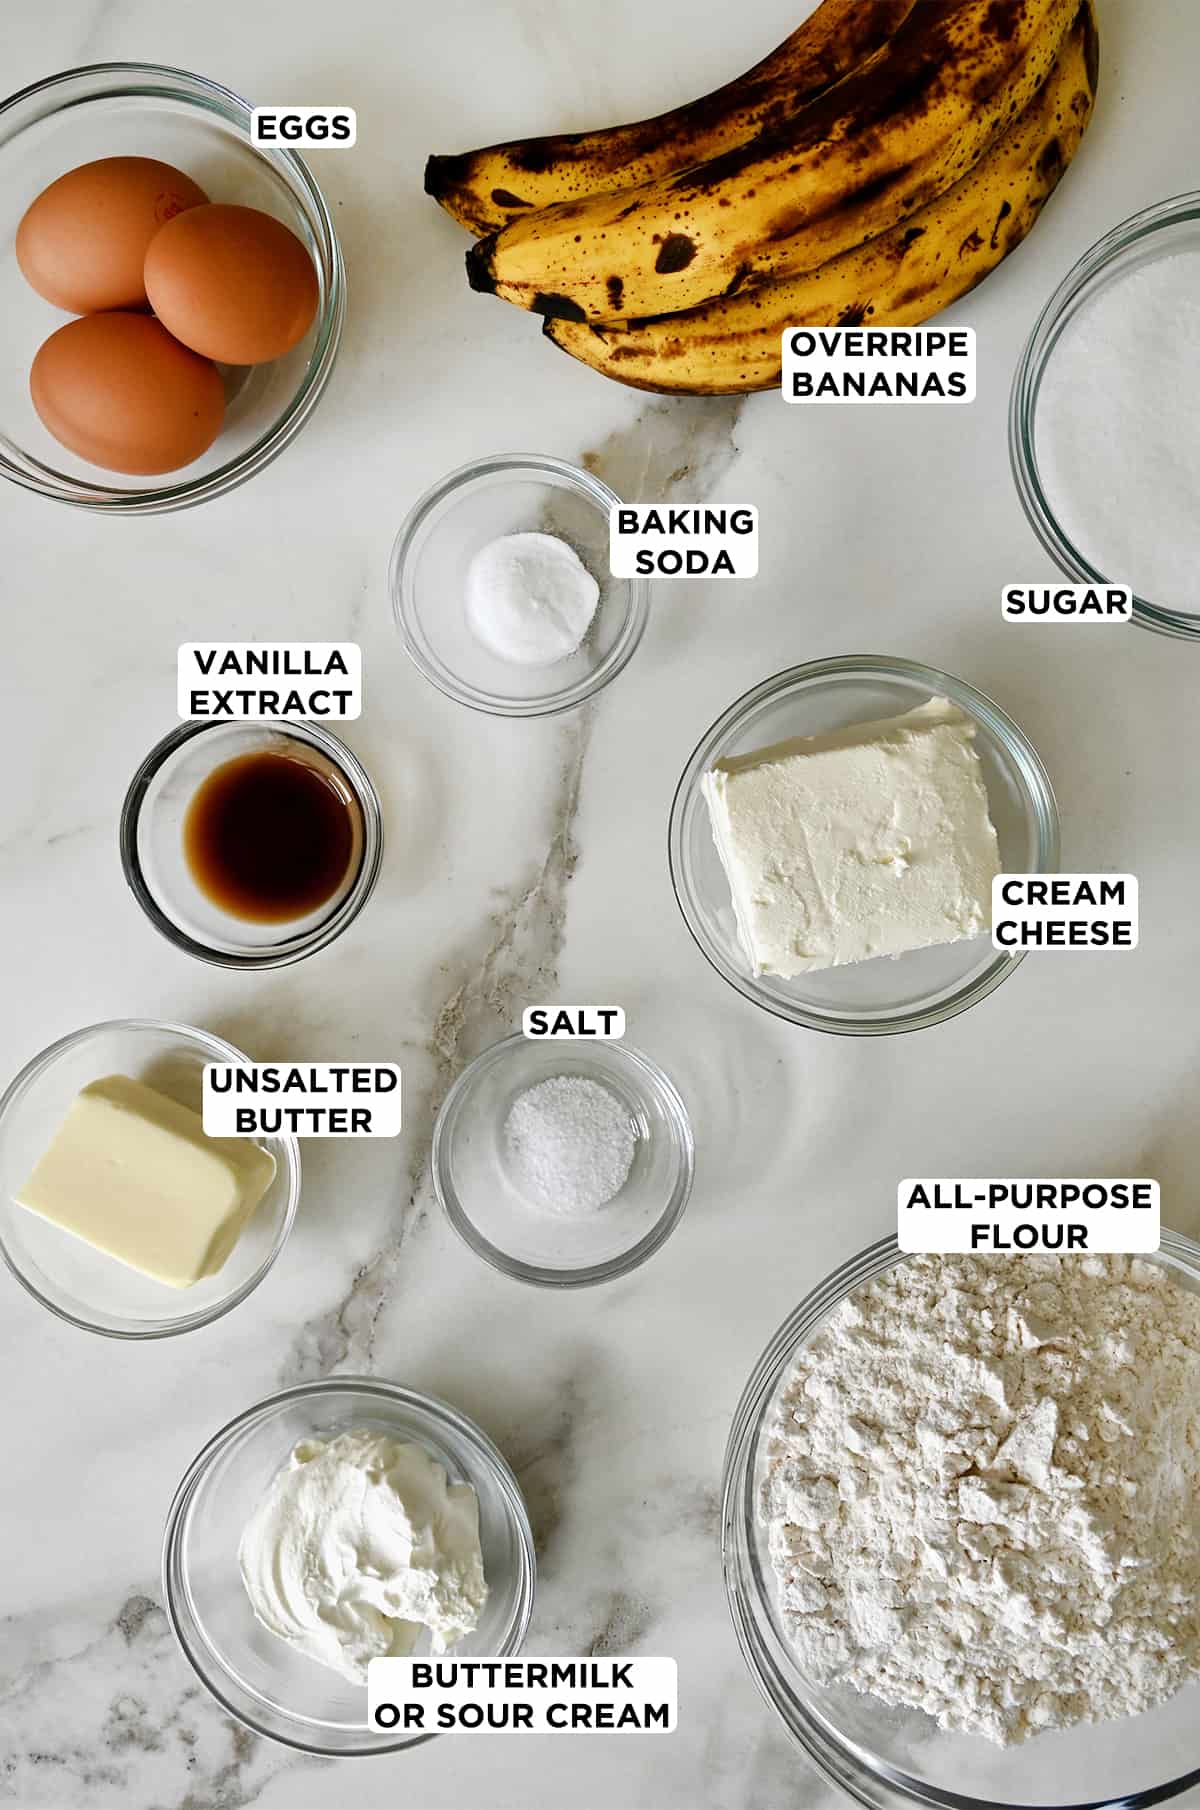 All of the ingredients needed to make cream cheese-swirled banana bread in glass bowls, including two eggs, three overripe bananas, granulated sugar, cream cheese, all-purpose flour, baking soda, salt, vanilla extract, unsalted butter and buttermilk.